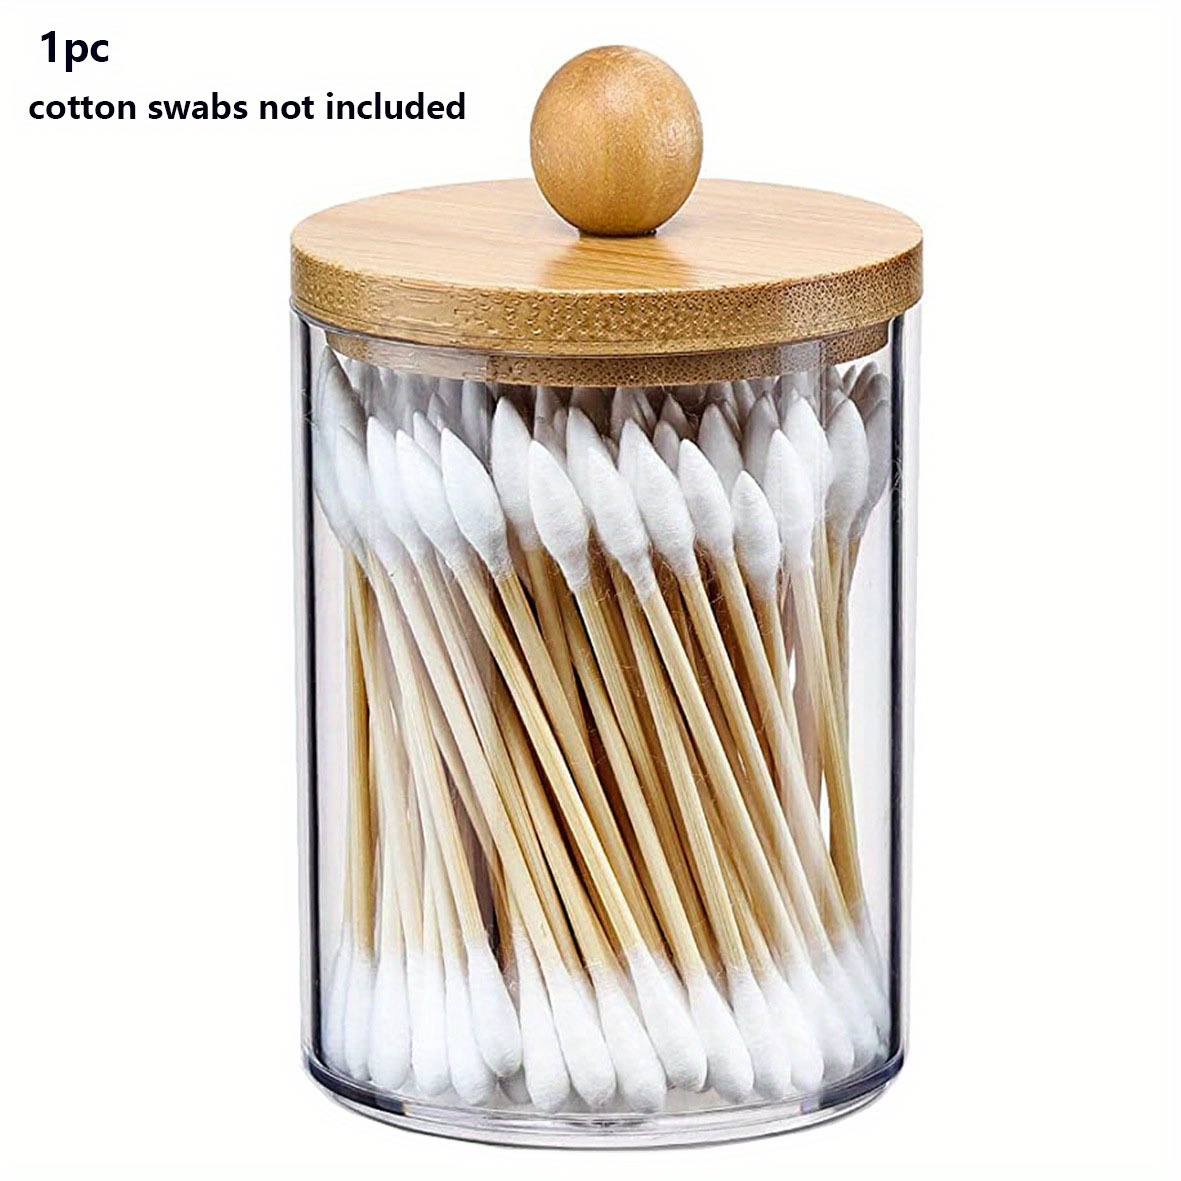 Acrylic Cotton Swabs Jar Holder Canister For Ball Swab Round Pads Clear Vanity Makeup Organizer For Bathroom